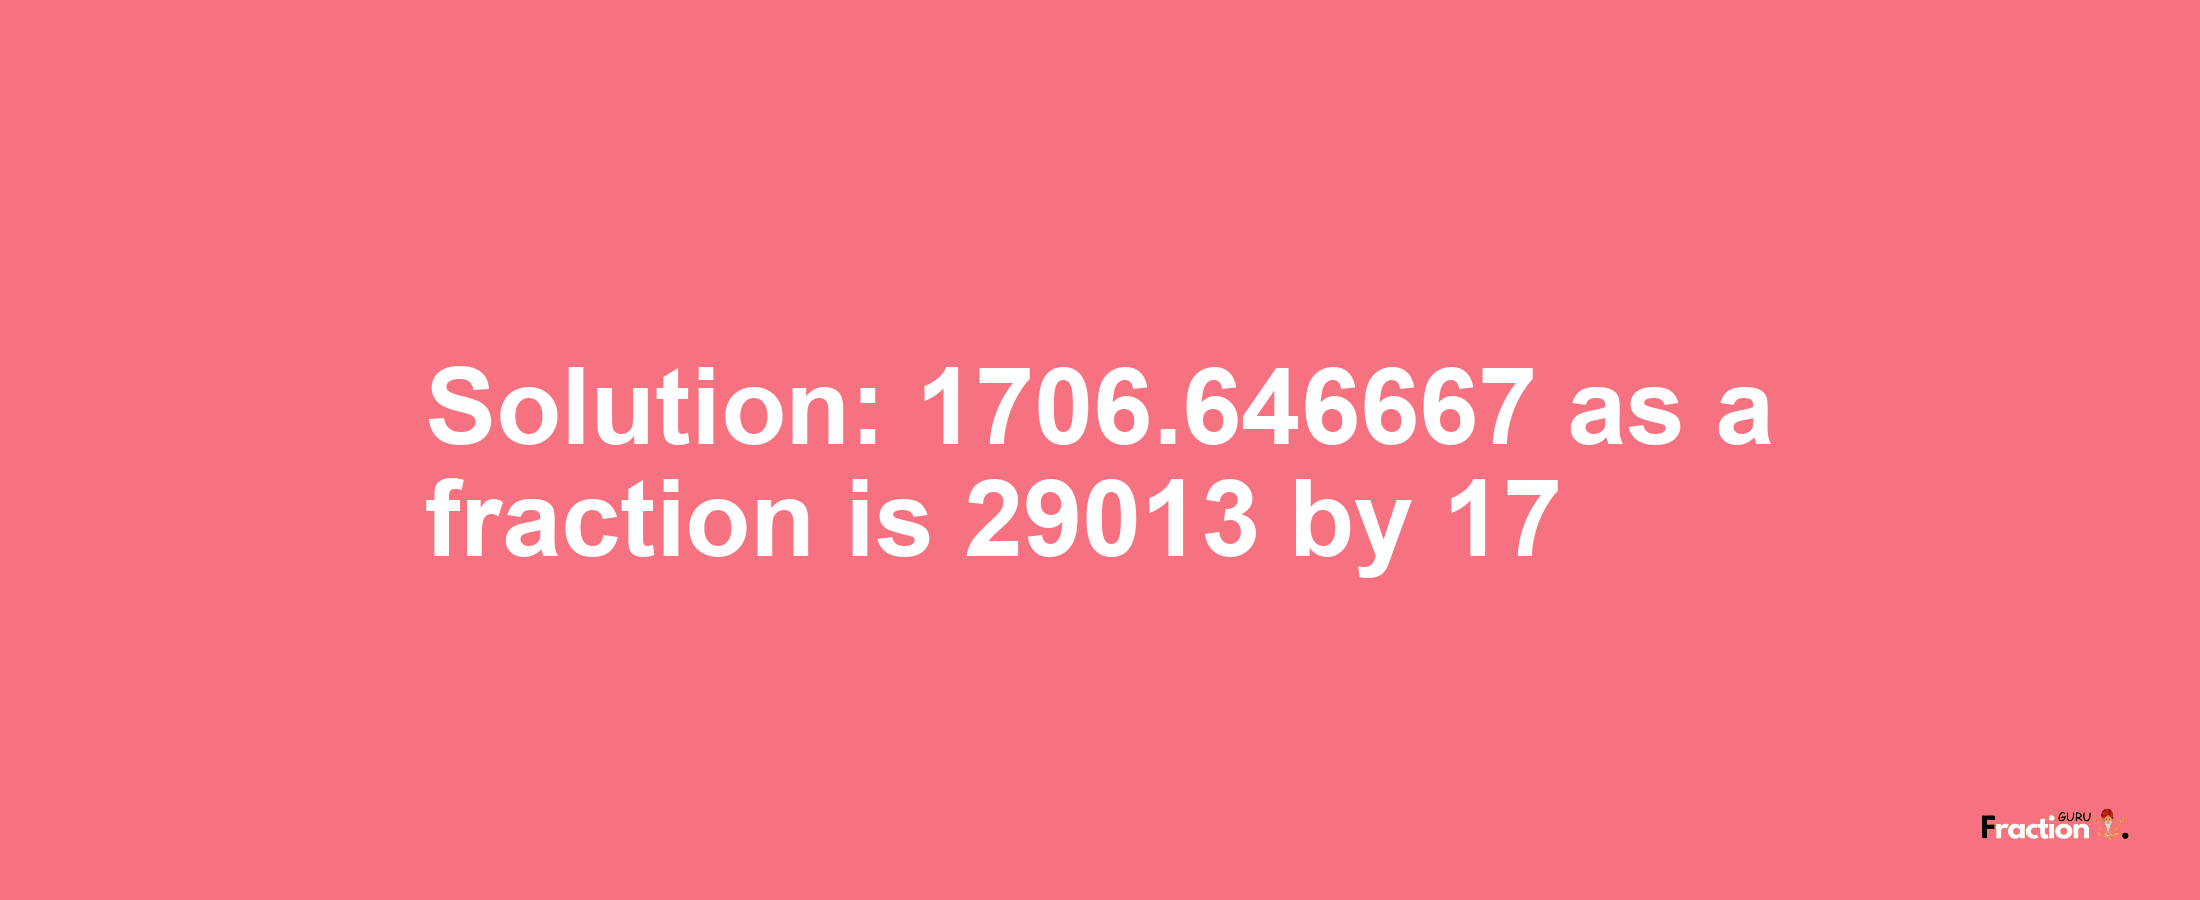 Solution:1706.646667 as a fraction is 29013/17